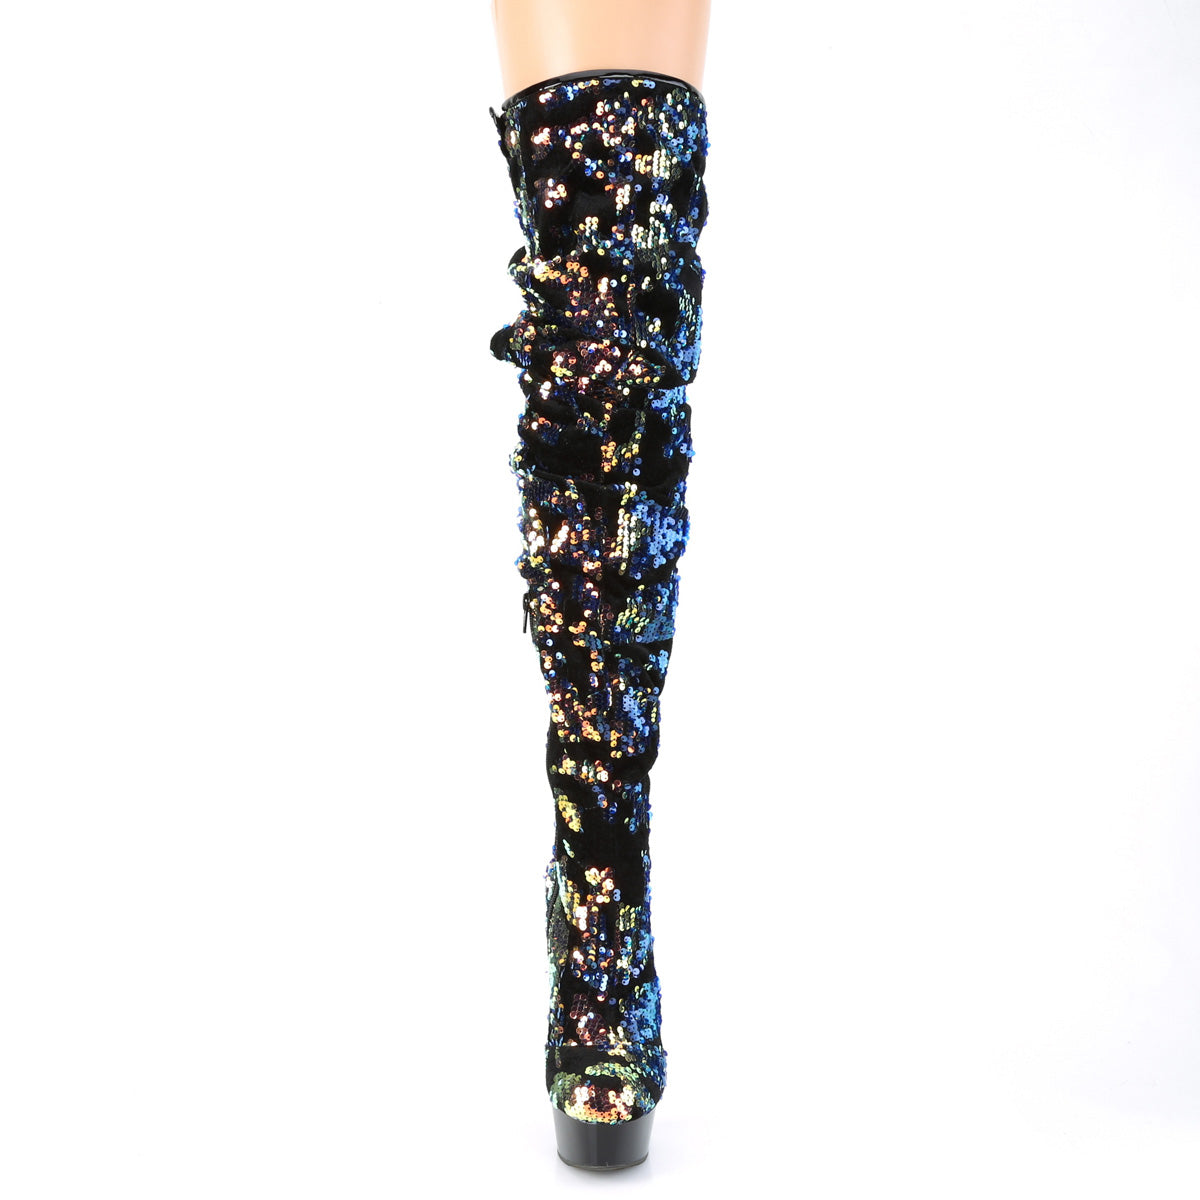 DELIGHT-3004 Black & Blue Thigh High Boots